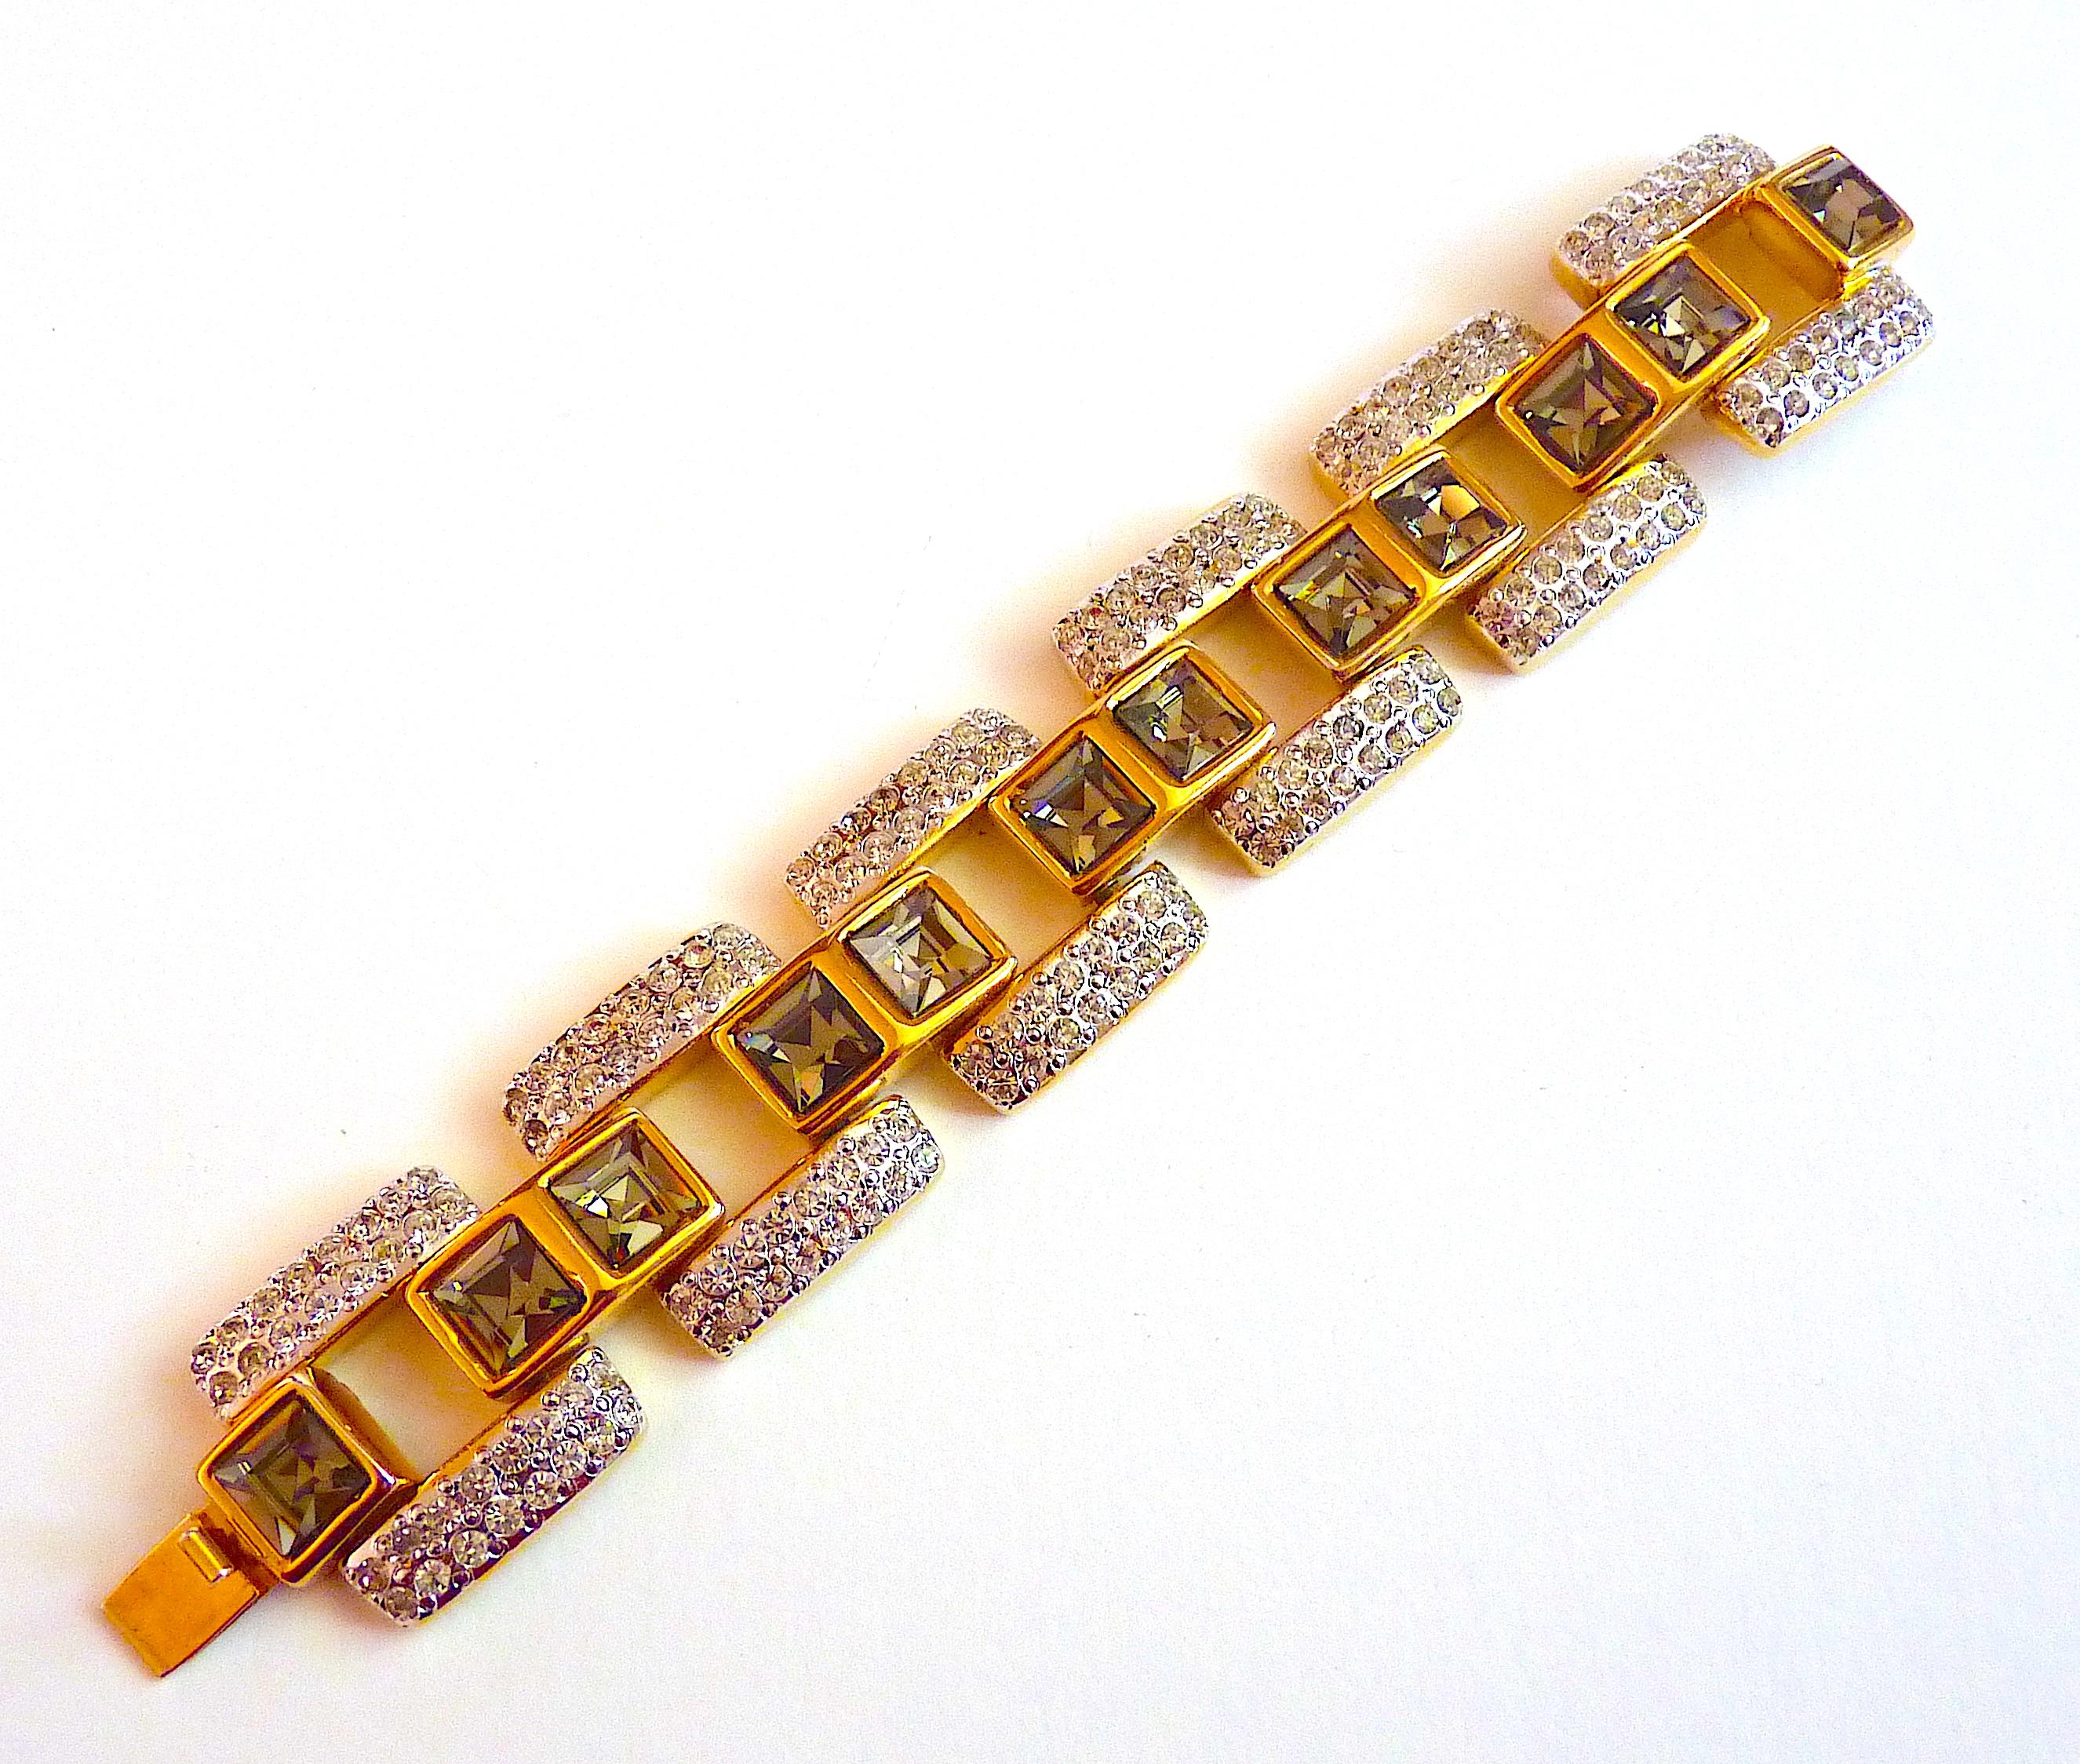 Rare YSL Chunky Bracelet made of large gold metal links adorned with Facetted Smoked Glass Crystals and Small Clear stones, Vintage from the 1980s
Stamped YSL at Backside on the clasp

A Gorgeous Masterpiece to add to your Collection !

CONDITION :